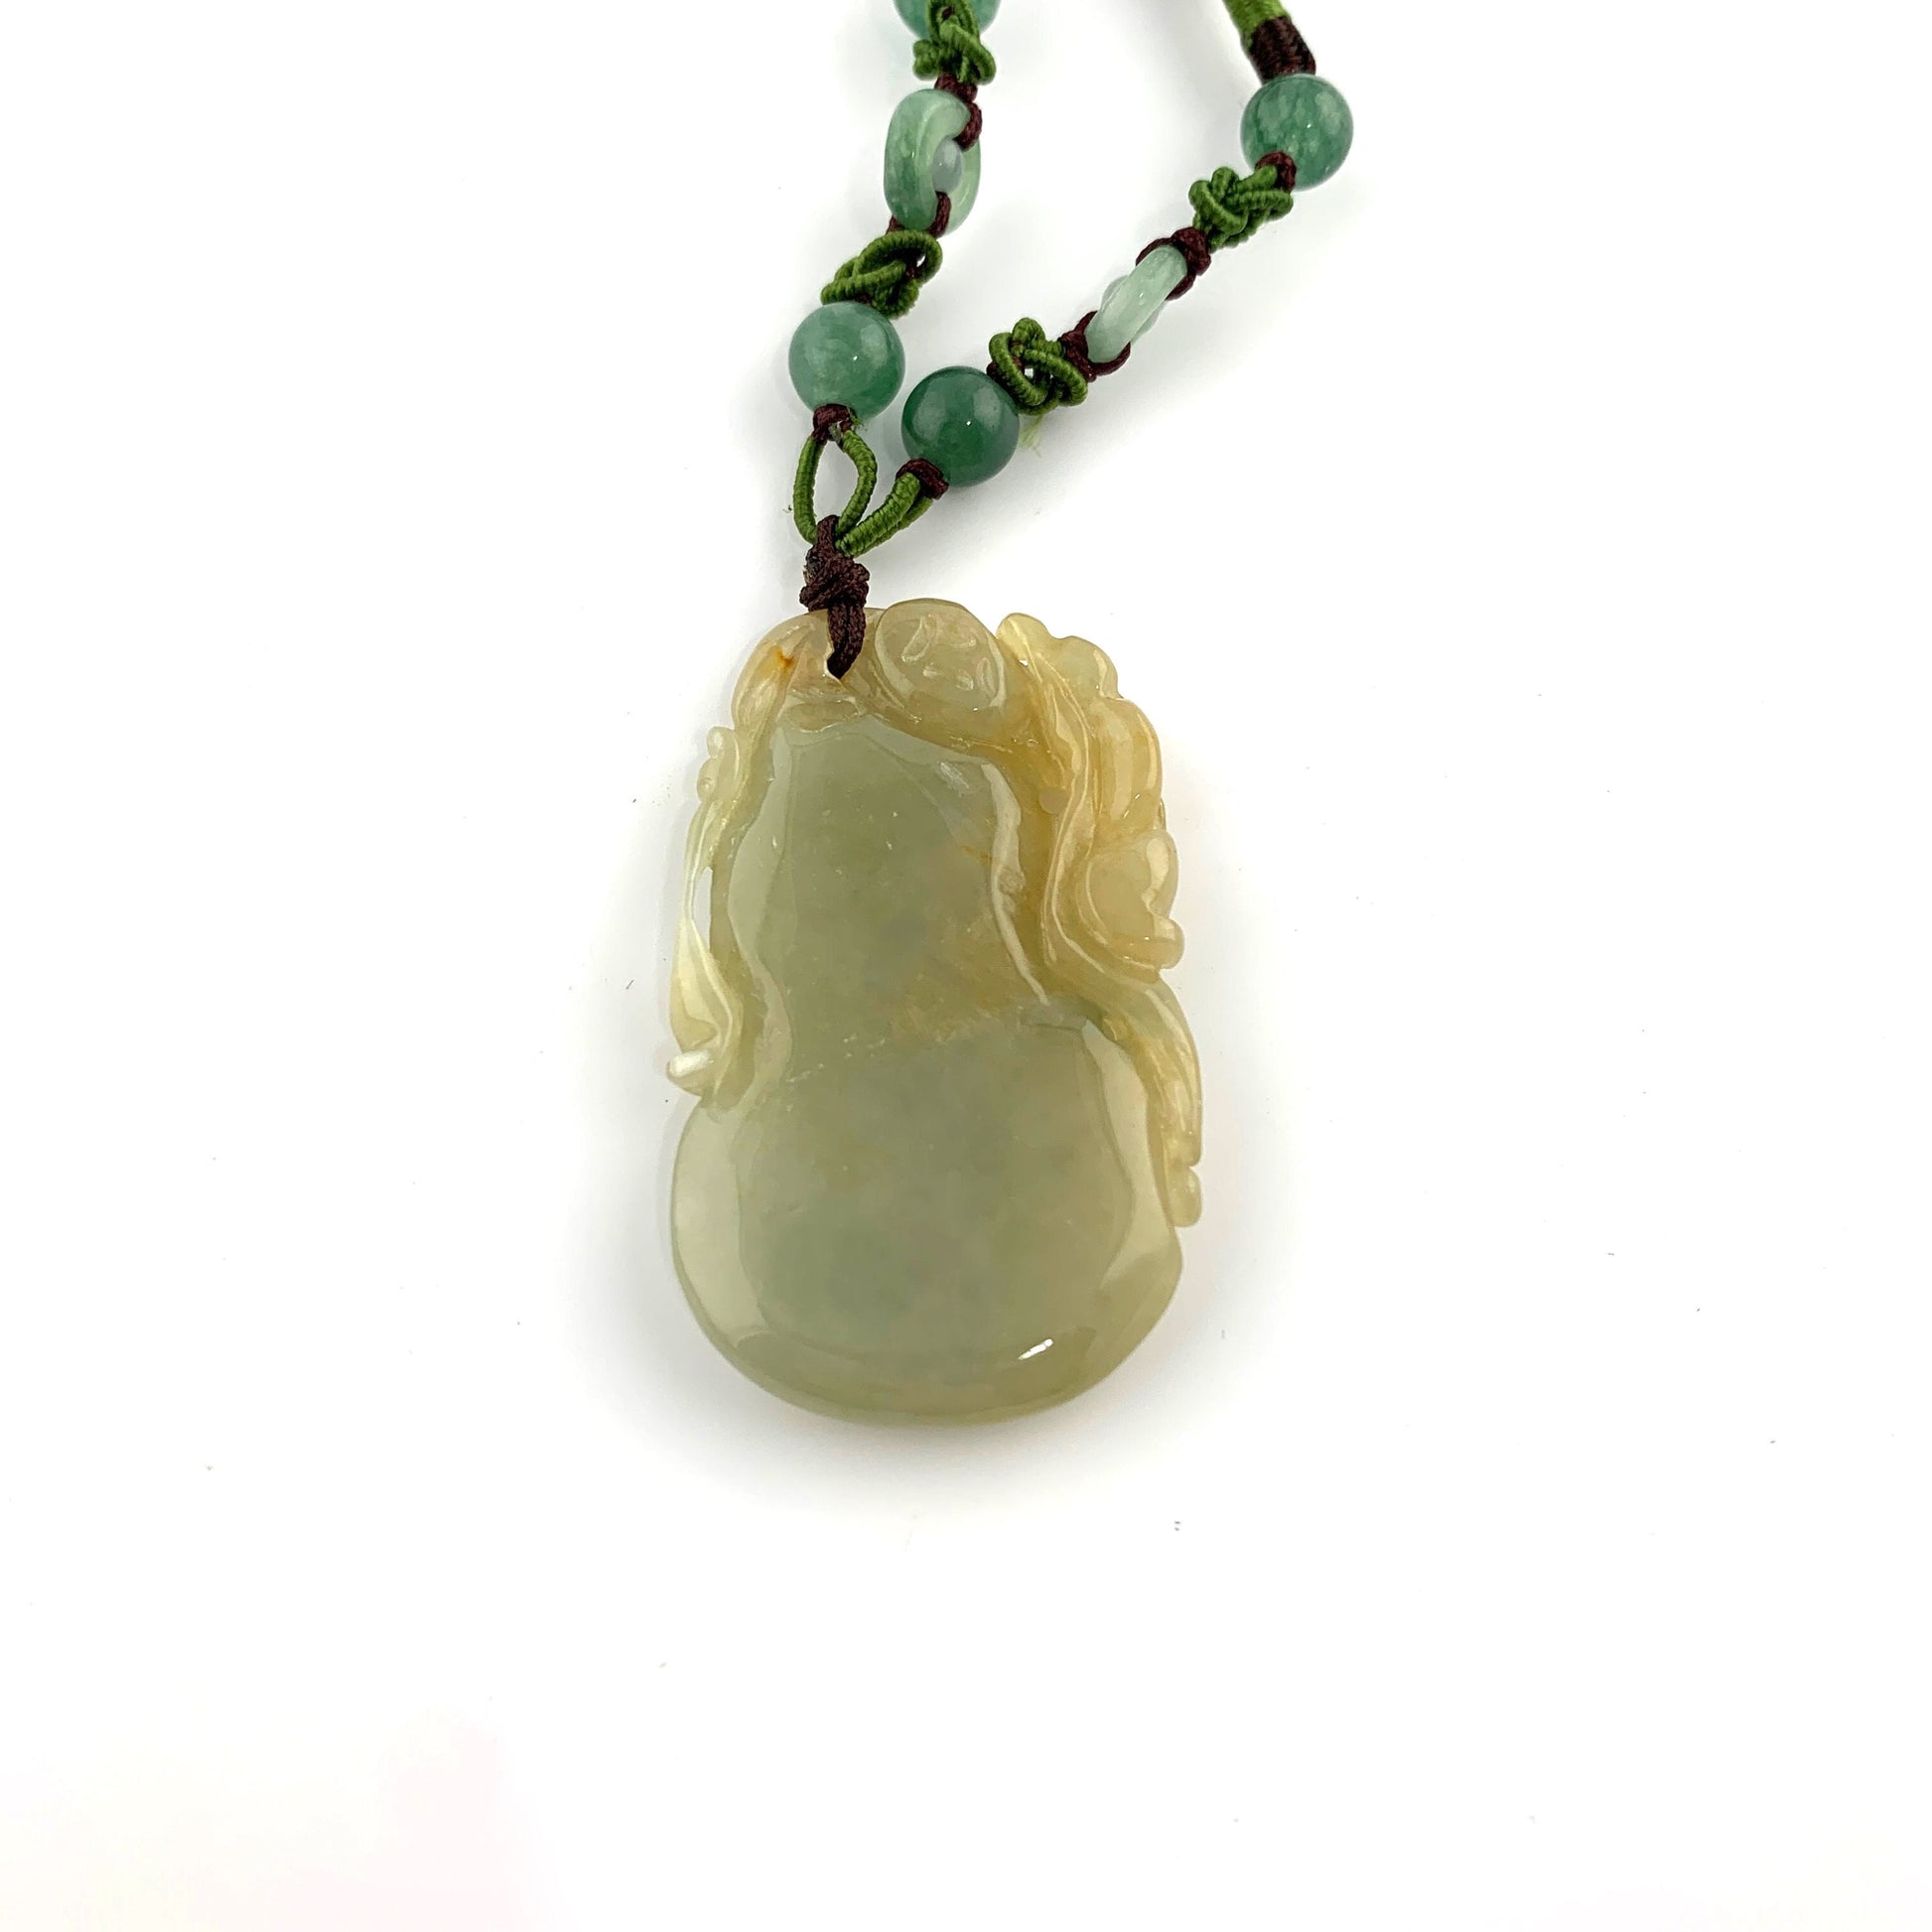 Yellow Jadeite Jade Peach Carved Necklace, YW-0110-1647022365 - AriaDesignCollection